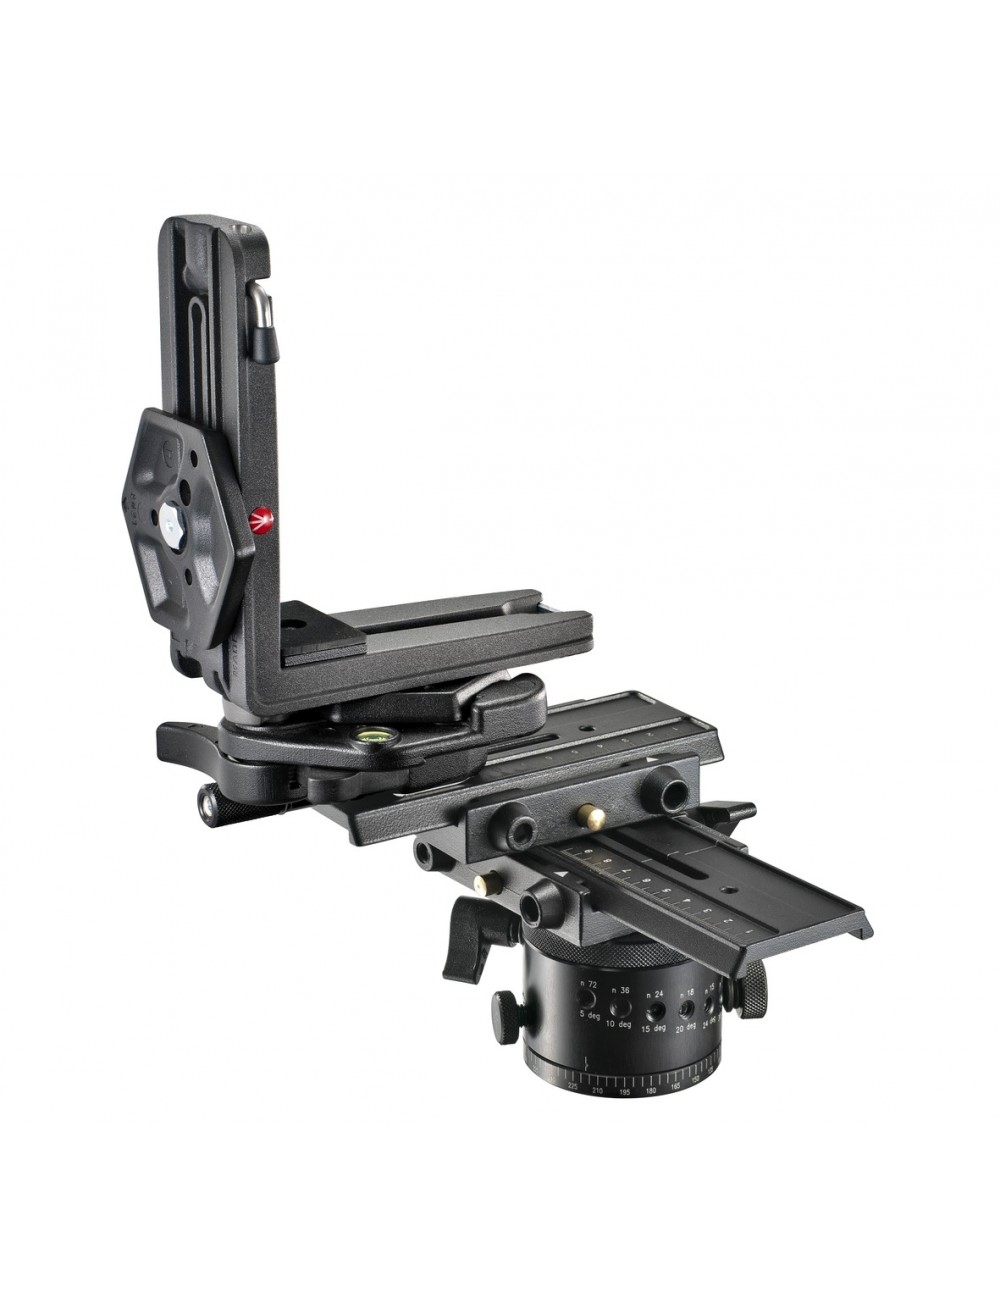 Panoramic head MH057A5 Manfrotto - 
Precise virtual reality and pan head
Durable aluminium construction
Camera can be positioned